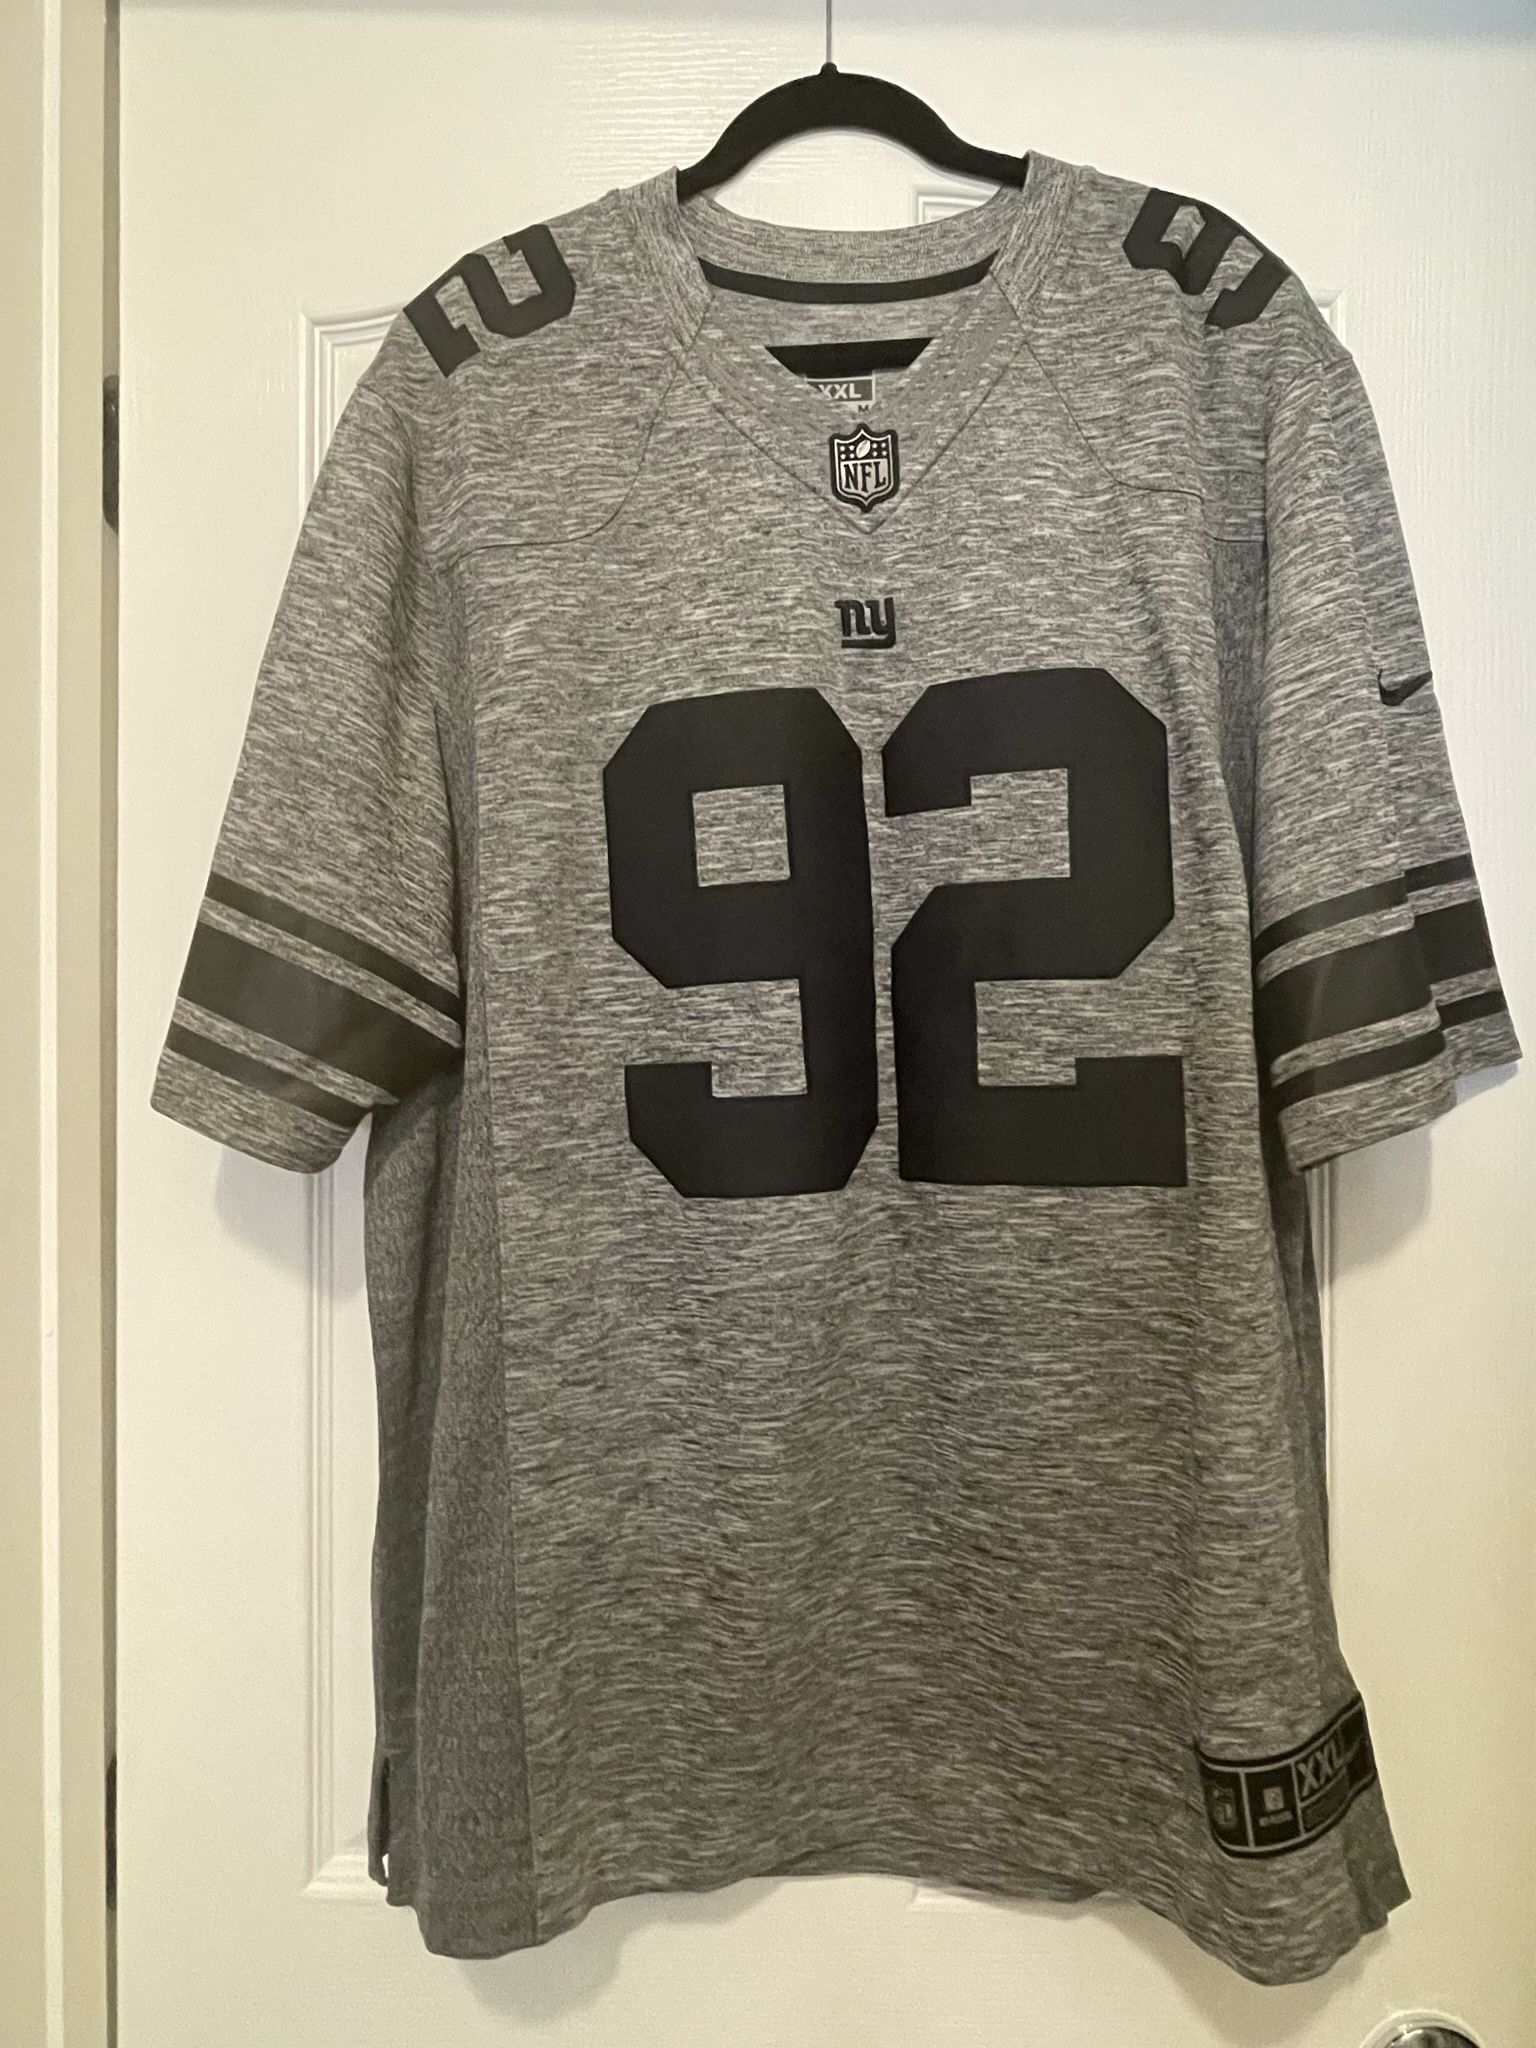 NY Giants Nike Gridiron Michael Strahan Jersey for Sale in Las